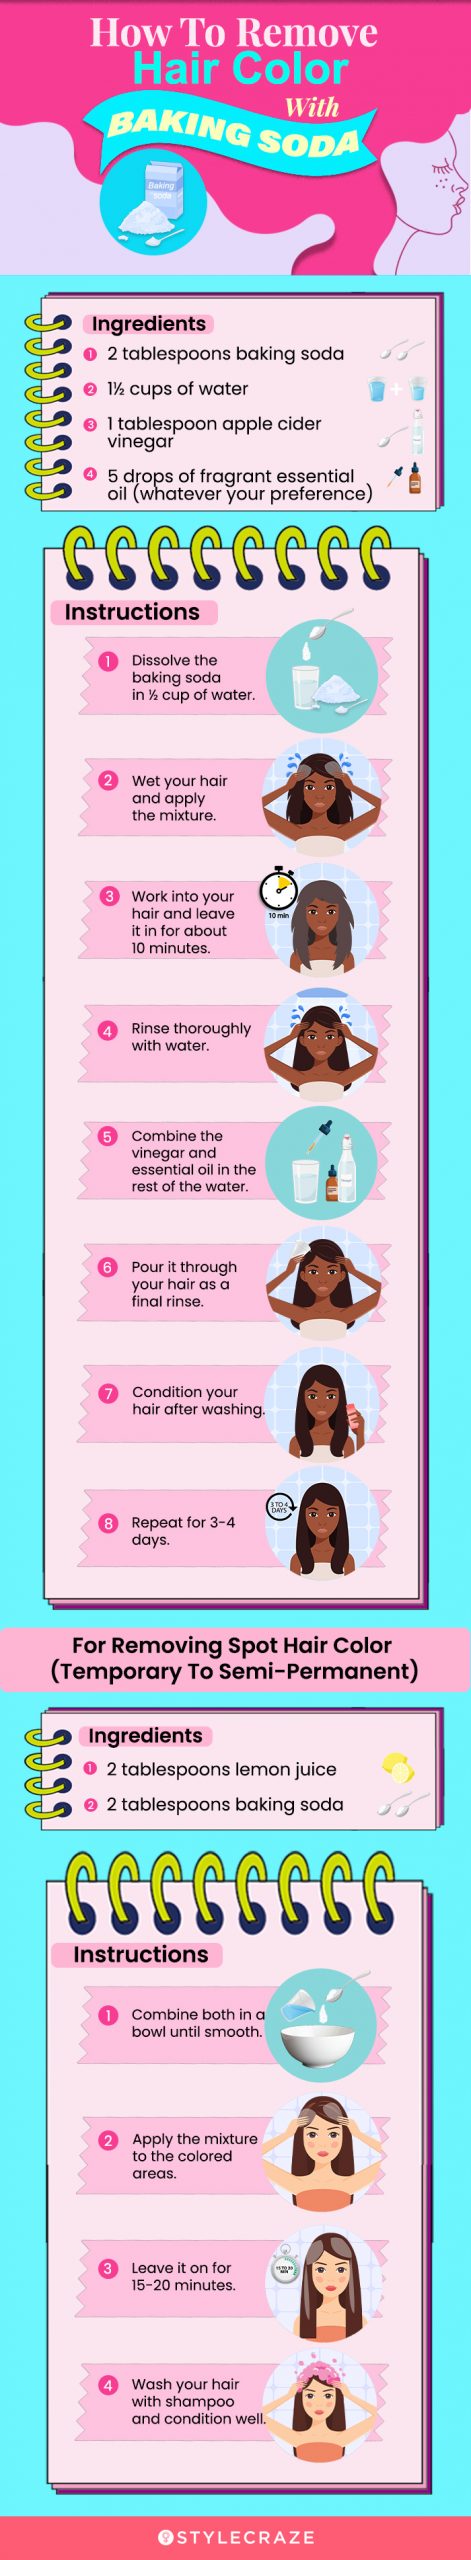 how to remove hair color with baking soda [infographic]